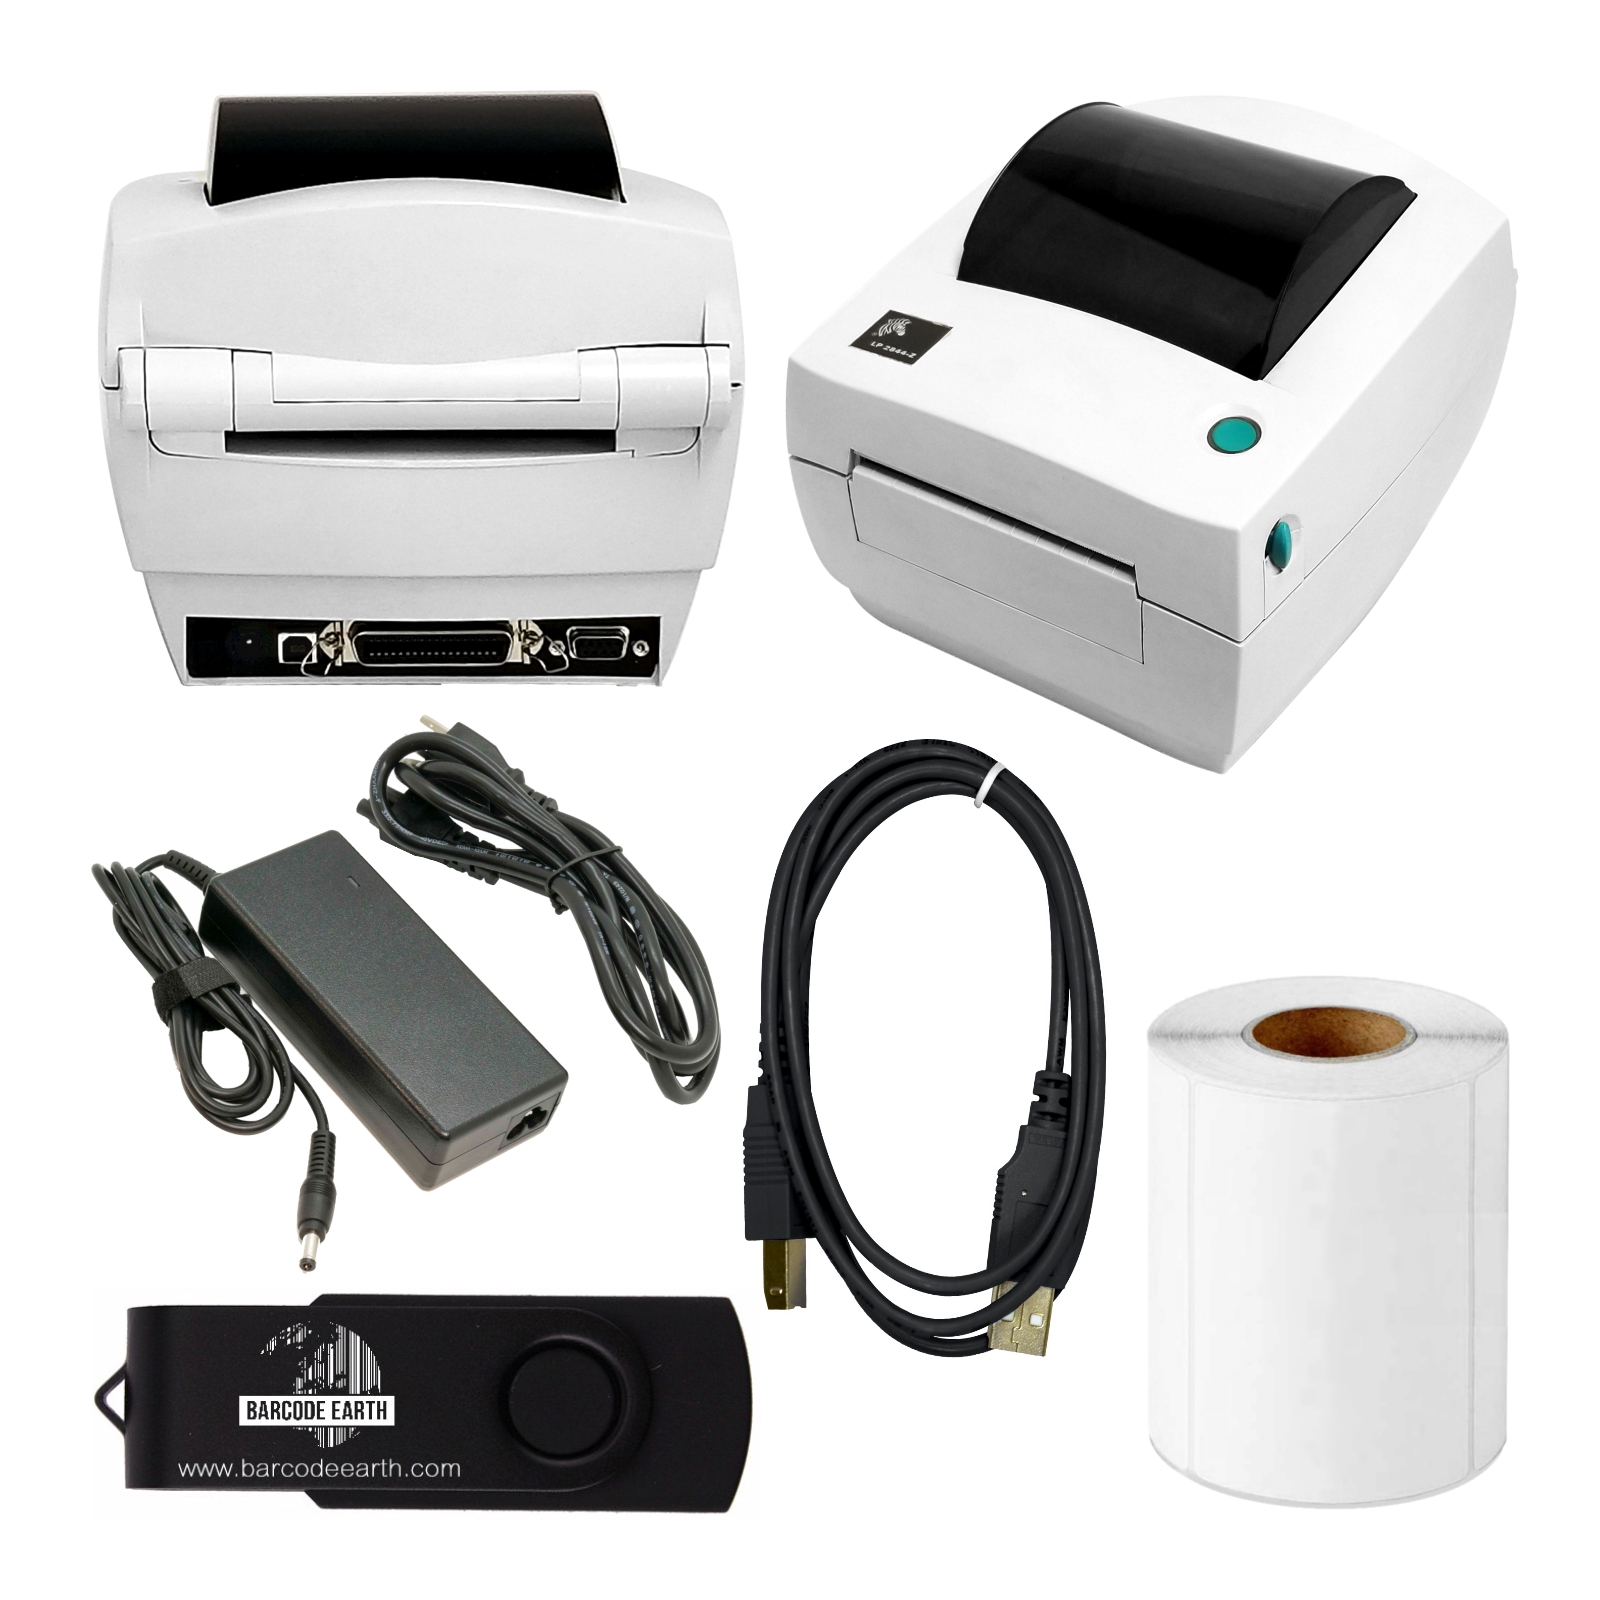 venom Accord nægte Zebra LP2844-Z Serial & USB Ports Power Supply, USB Cable, Roll of 4"x 6"  Labels – Barcodeearth